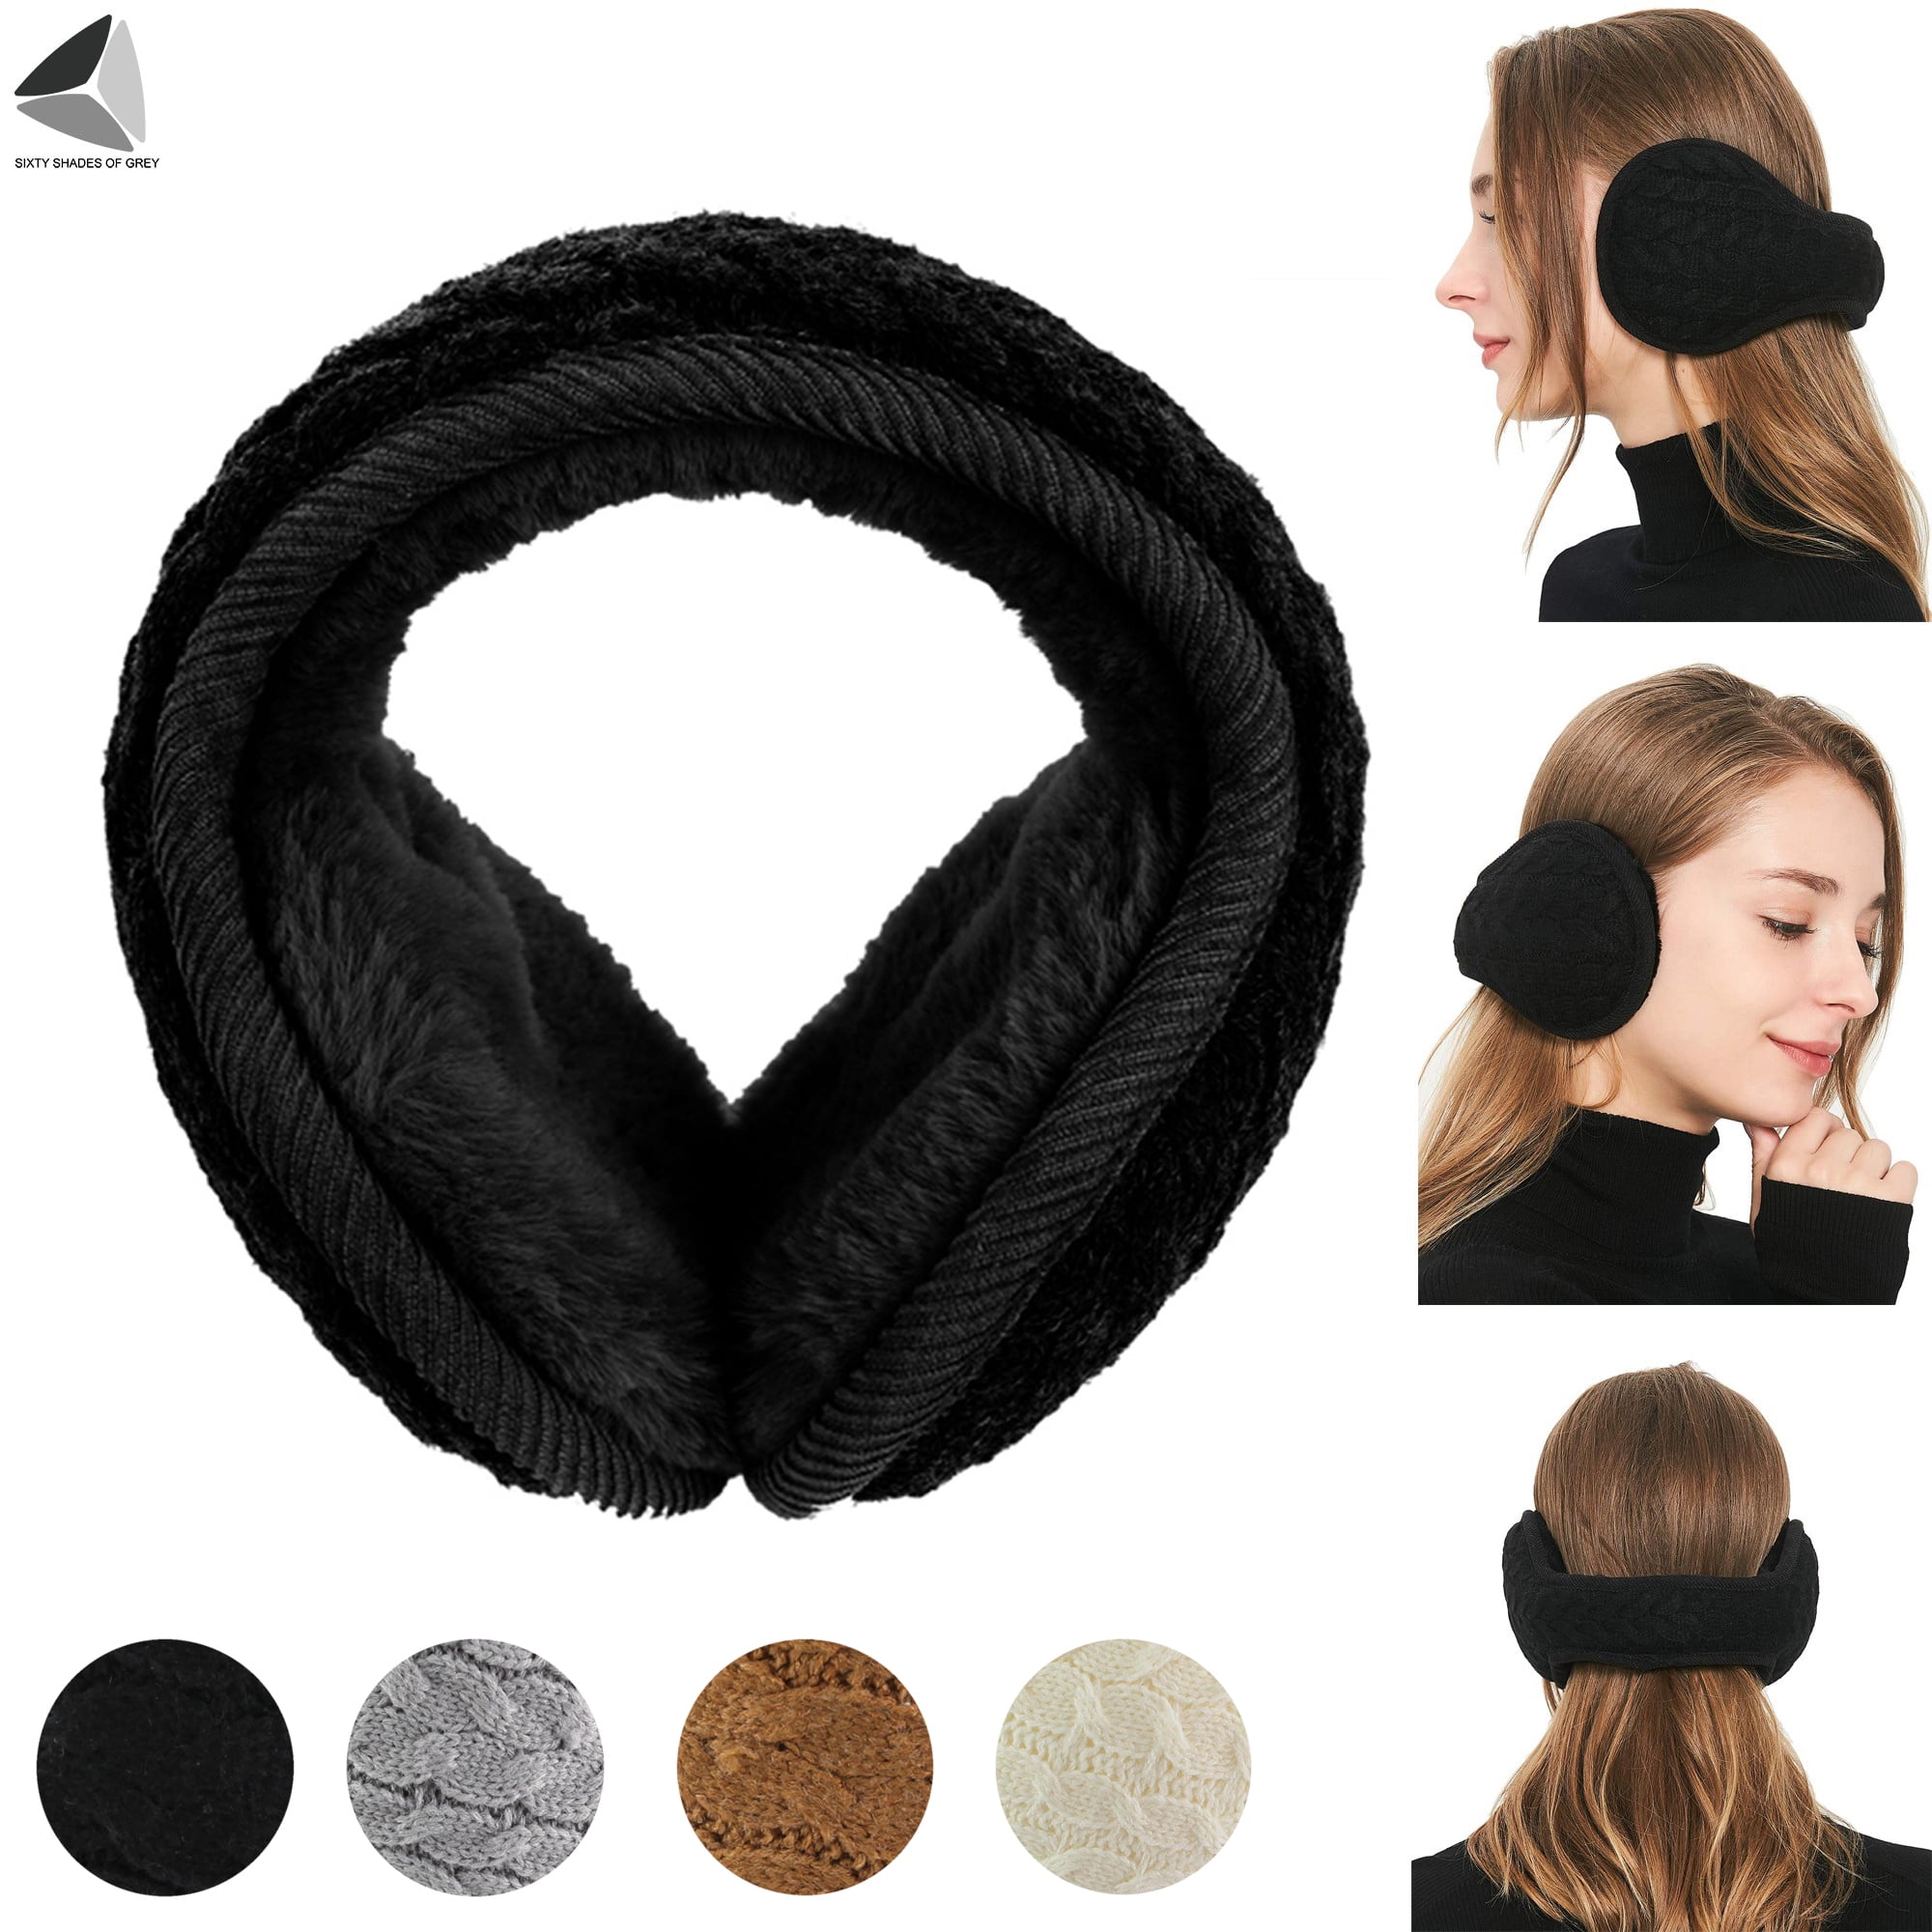 2 Pieces Foldable Ear Warmers for Women Men Adjustable Knitted Earmuffs Furry Fleece Lining Cable Unisex Ear Cover Winter Accessories 